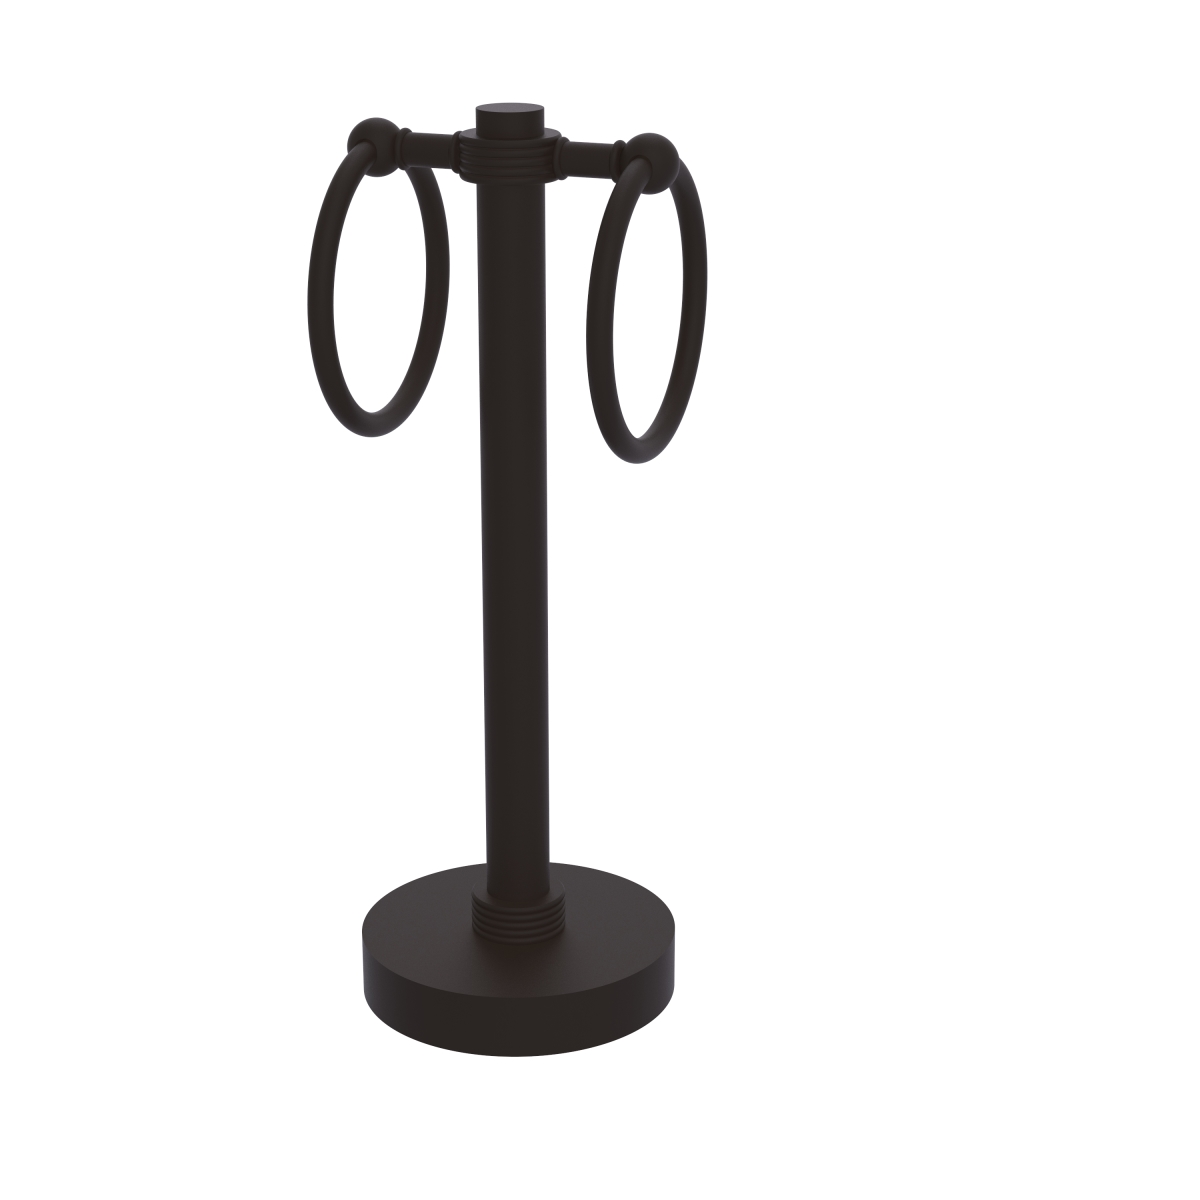 953g-orb Vanity Top 2 Towel Ring Guest Towel Holder With Groovy Accents, Oil Rubbed Bronze